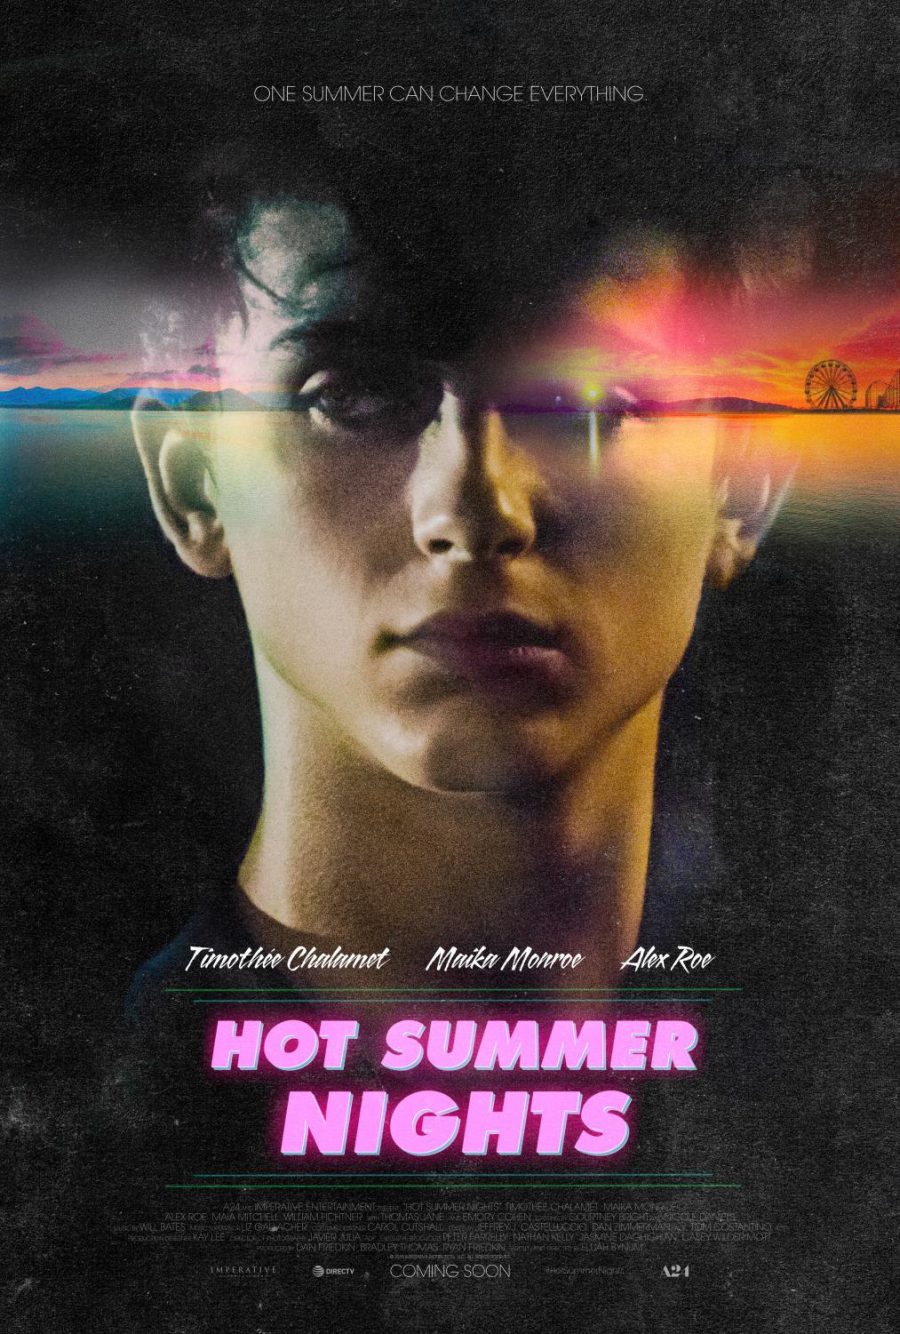 Hot Summer Nights surprises fans with dark ending – the Southerner